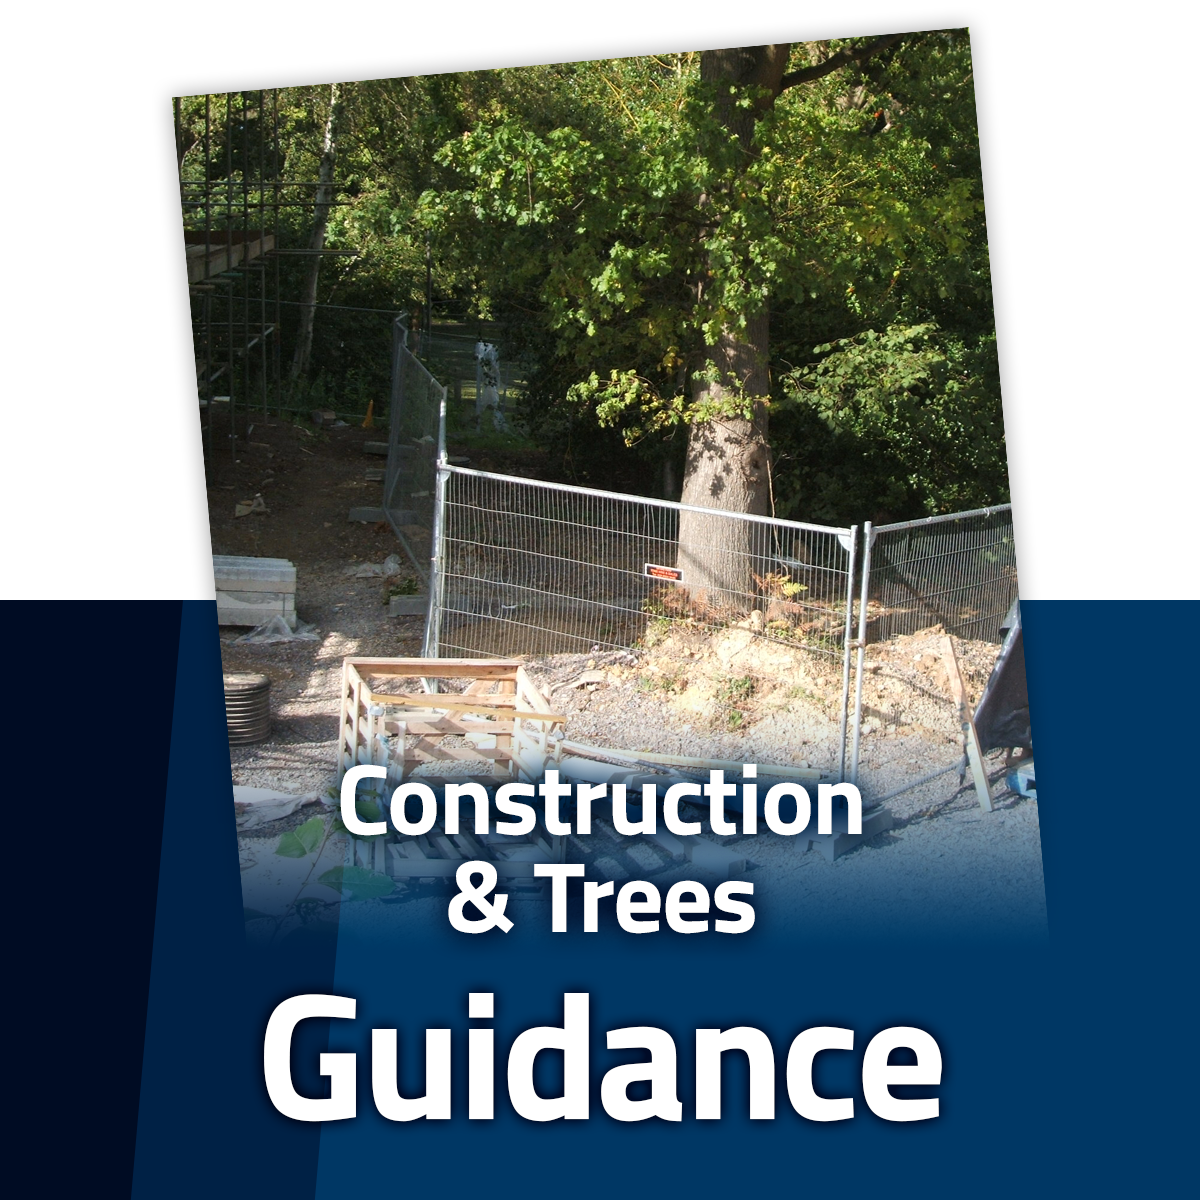 Guide to Trees and Construction